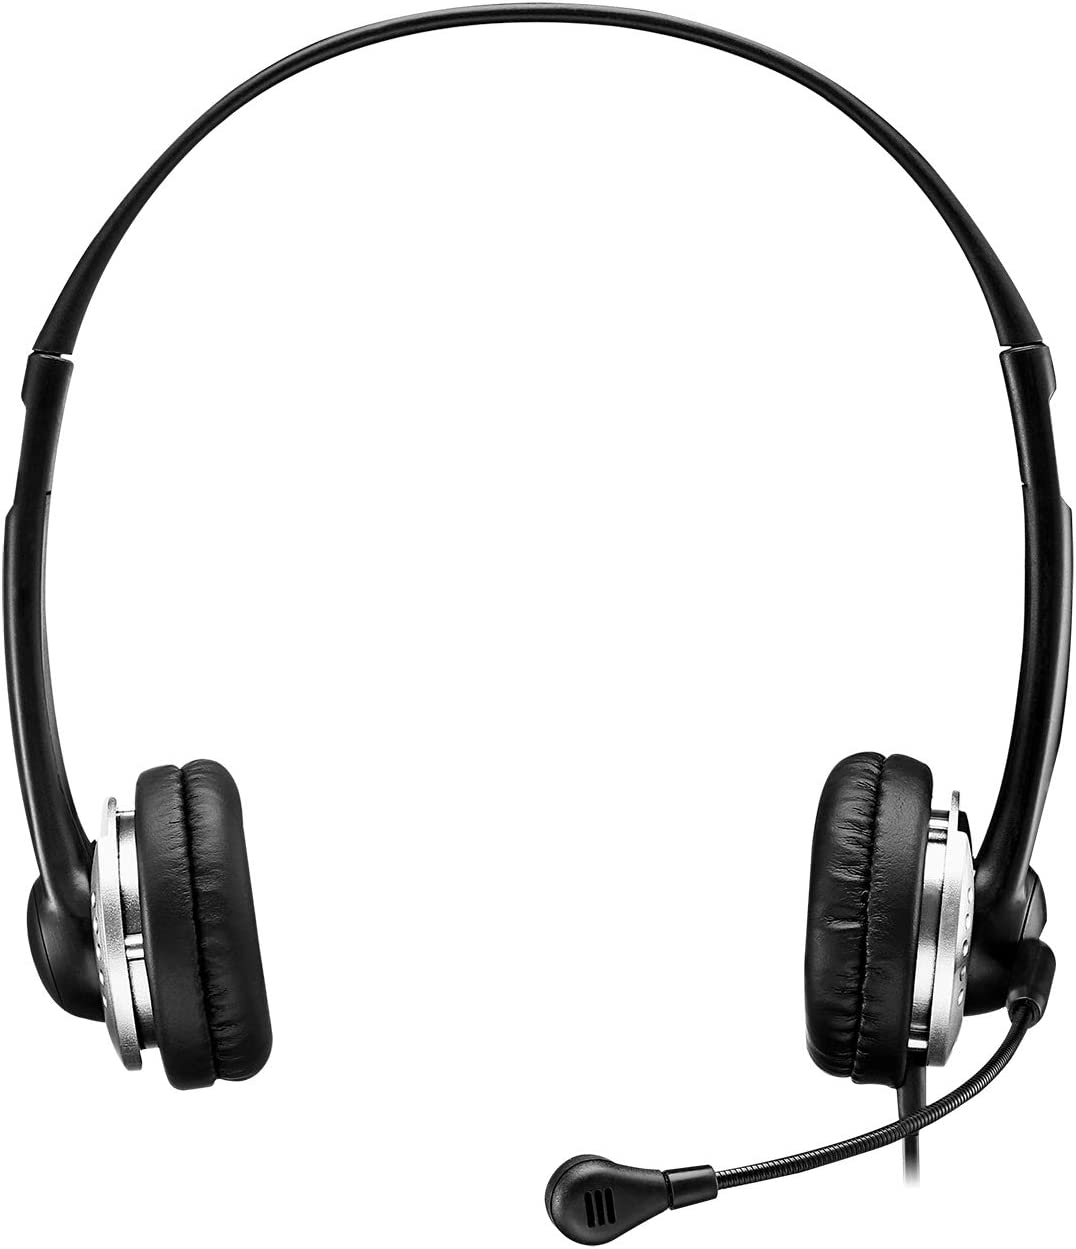 Adesso Xtream P2 USB Stereo Headphone with Adjustable Noise Canceling Microphone - Dealtargets.com